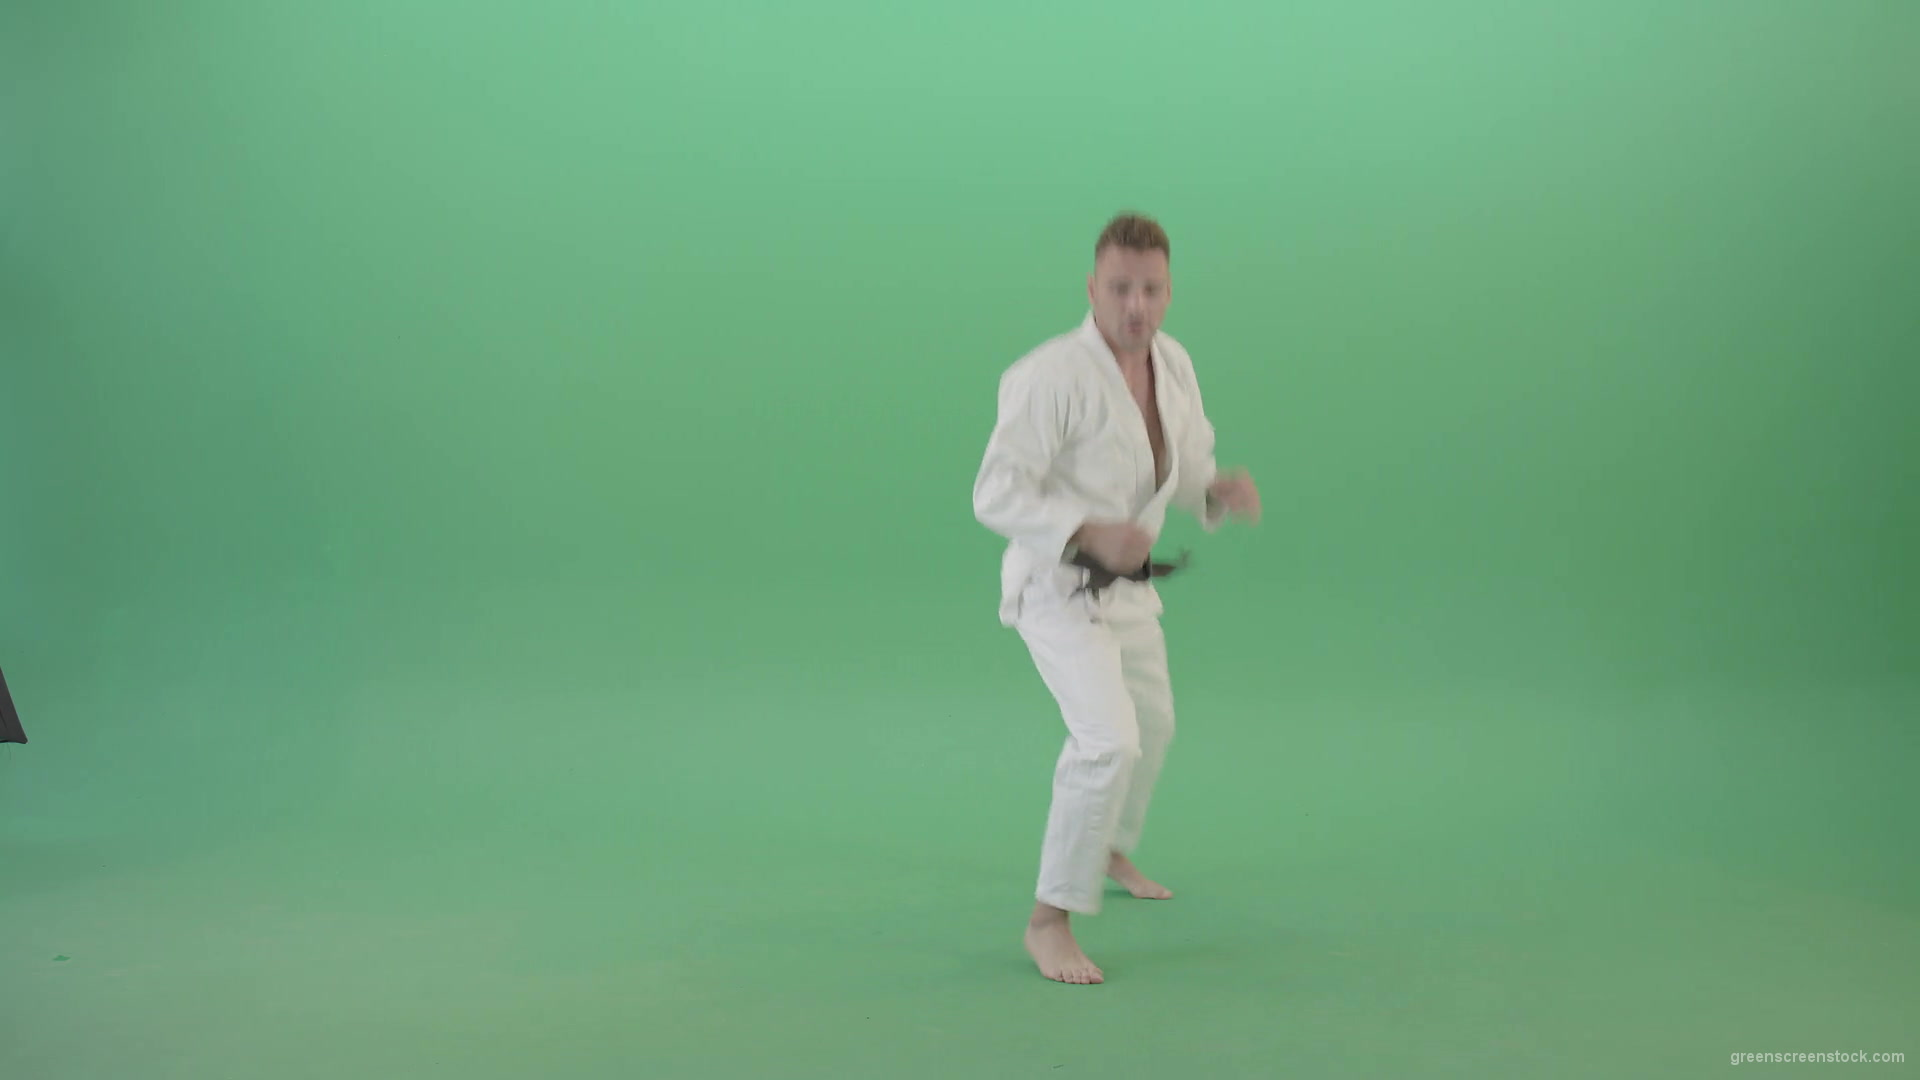 Jujutsu-Sportman-make-front-kick-and-punch-isolated-on-green-screen-4K-Video-Footage-1920_004 Green Screen Stock